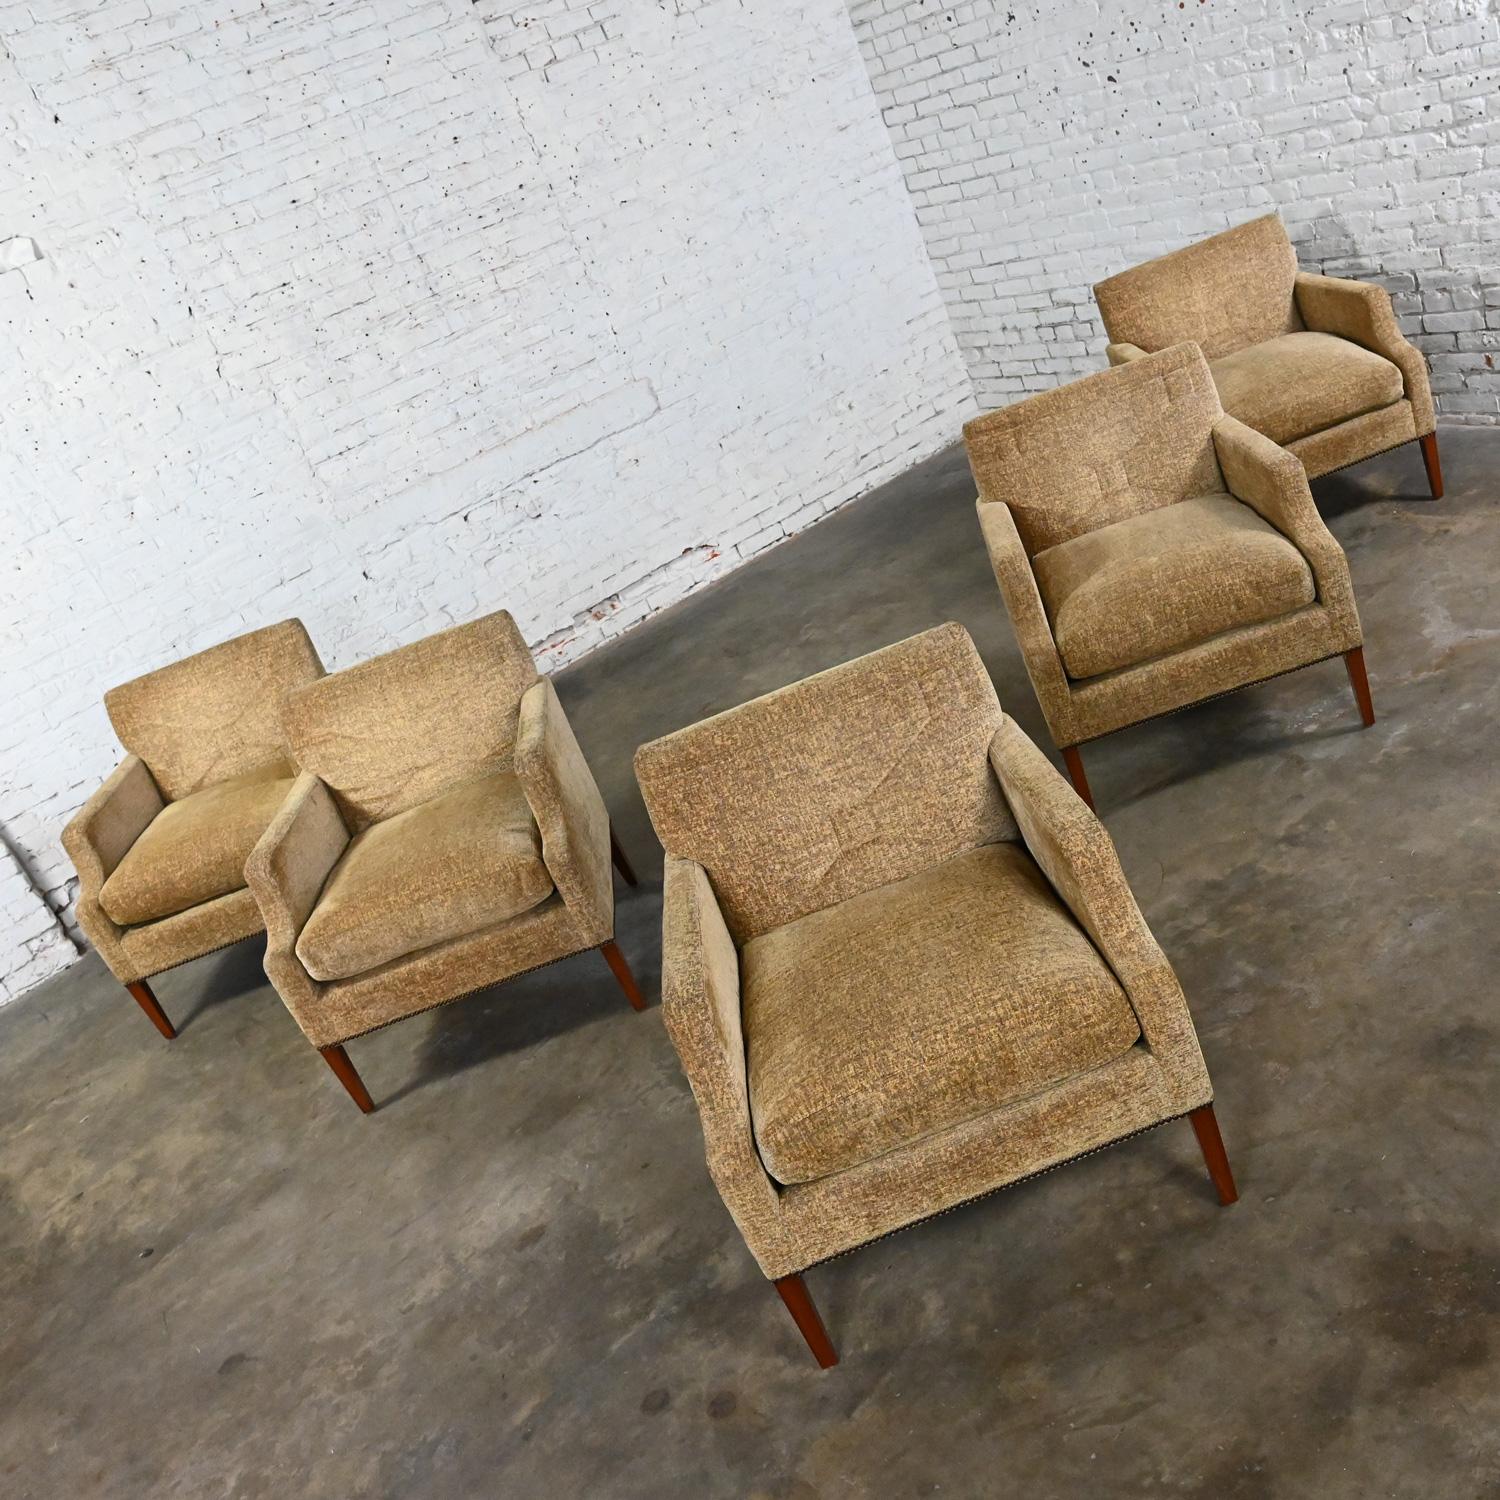 Late 20th - Early 21st Century Modern Khaki Accent Lounge Chair Down Seat For Sale 2